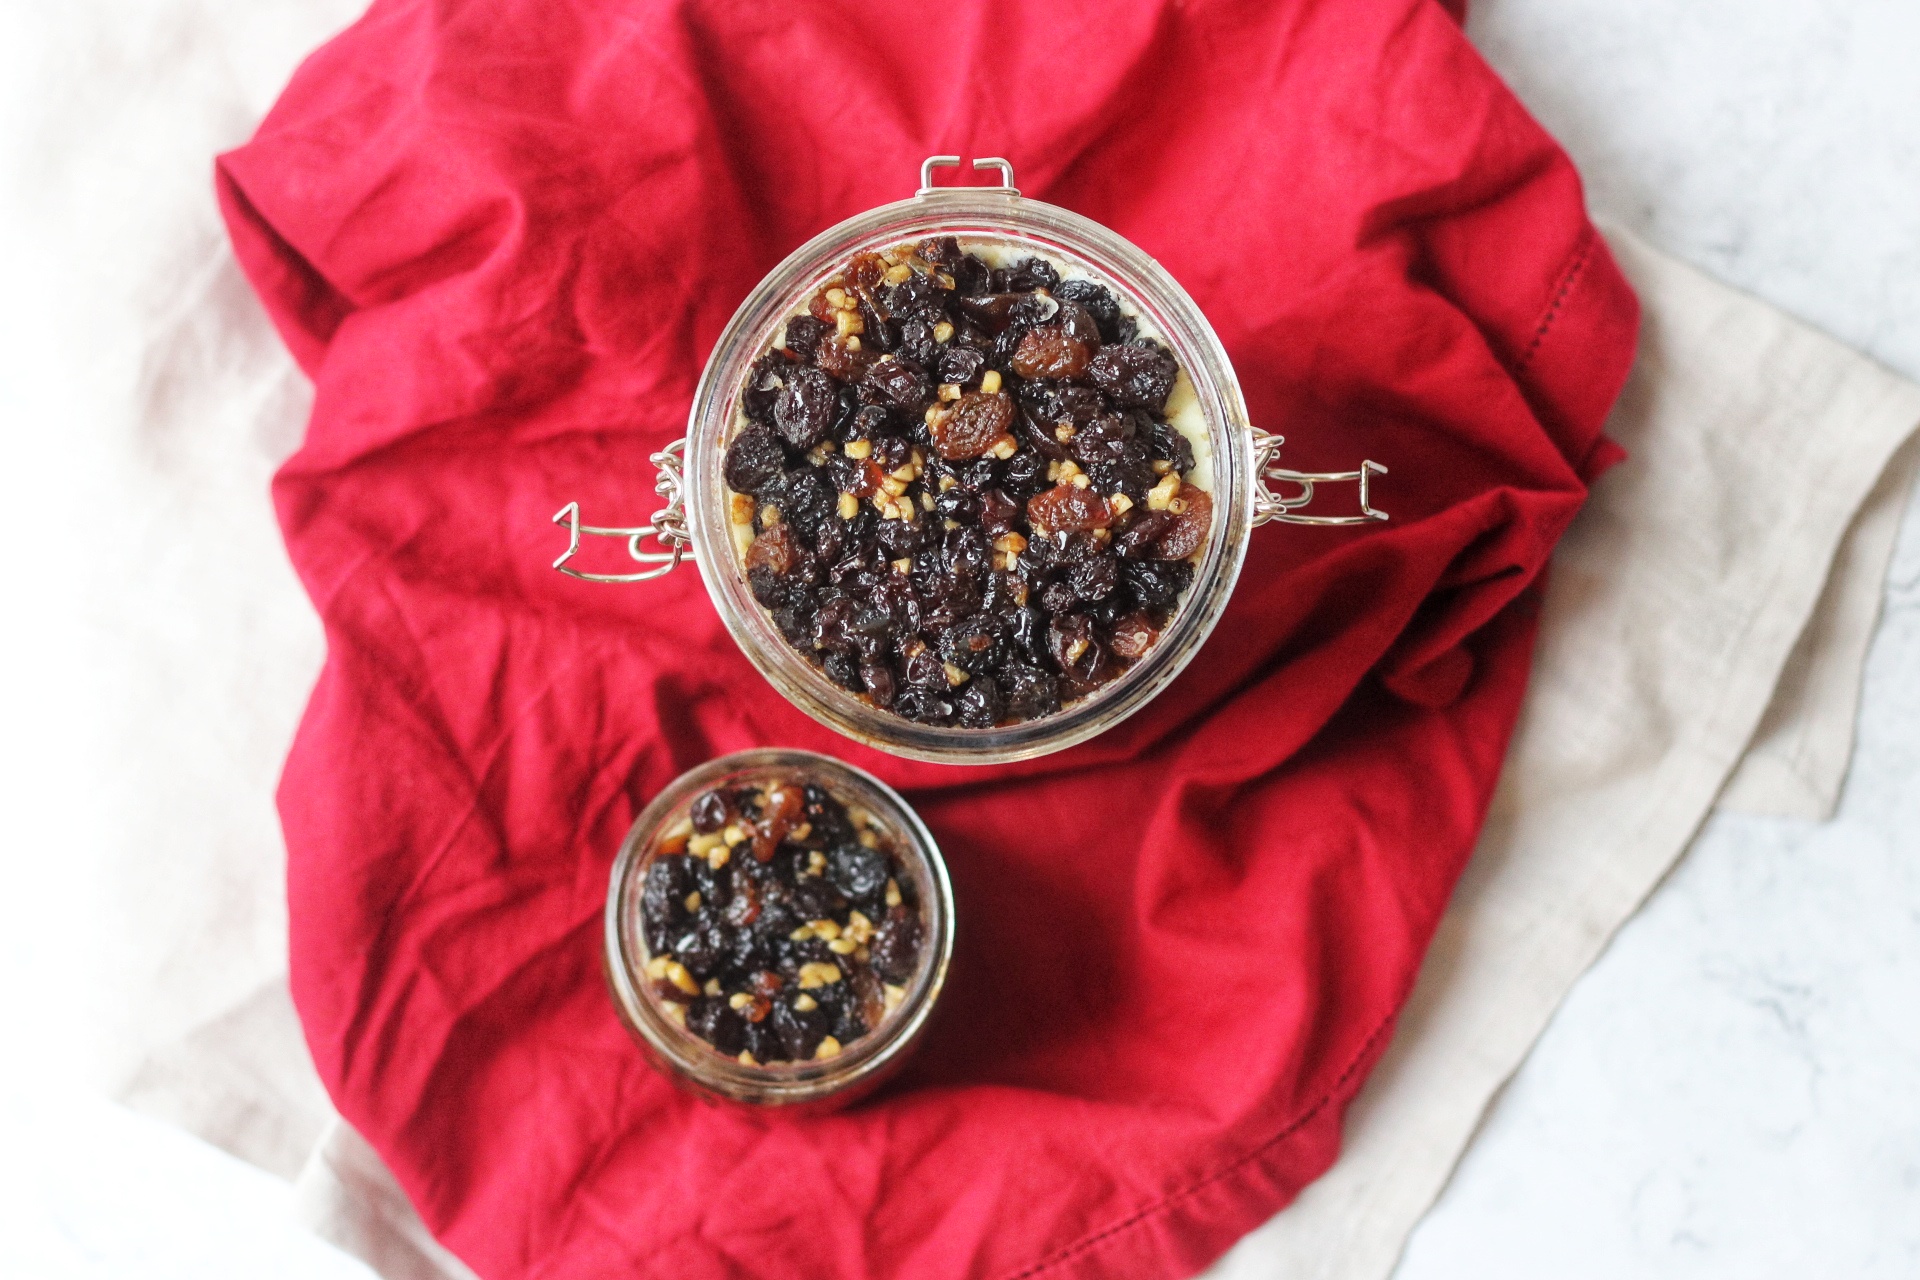 Mincemeat (for mince pies)